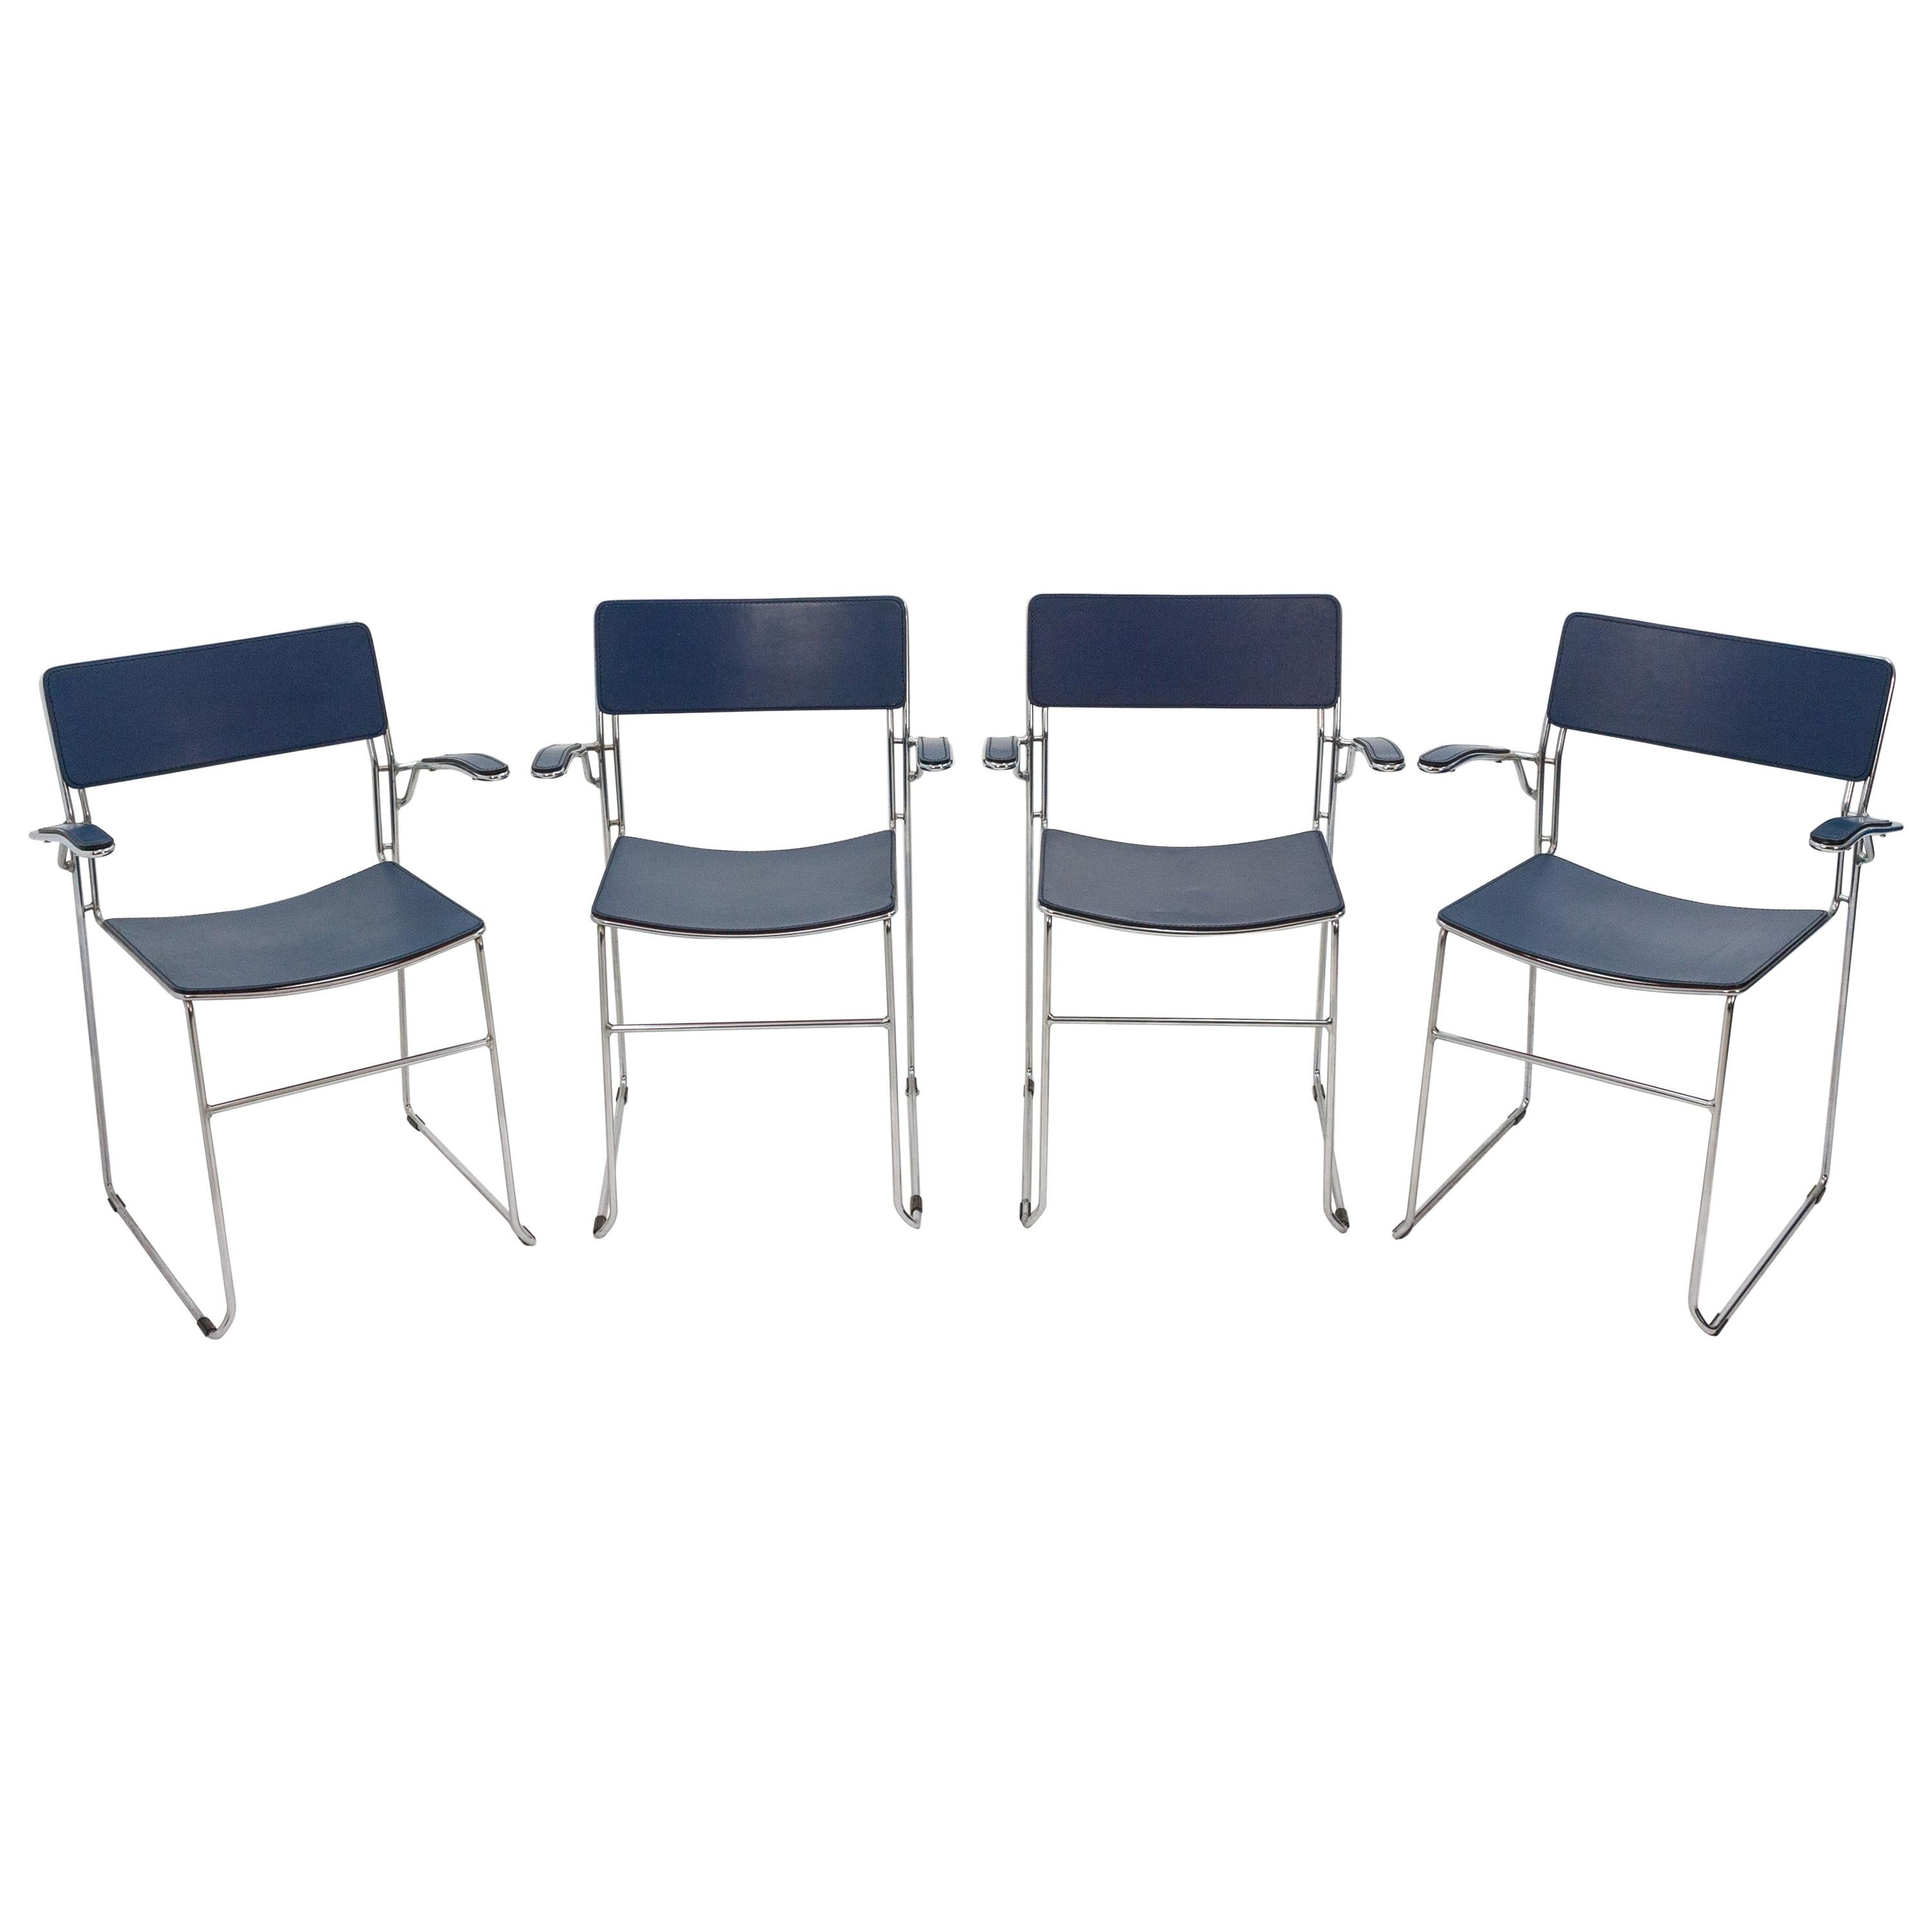 Four Arrben Sultana Chairs in Dark Blue Leather, Italy, 1980s